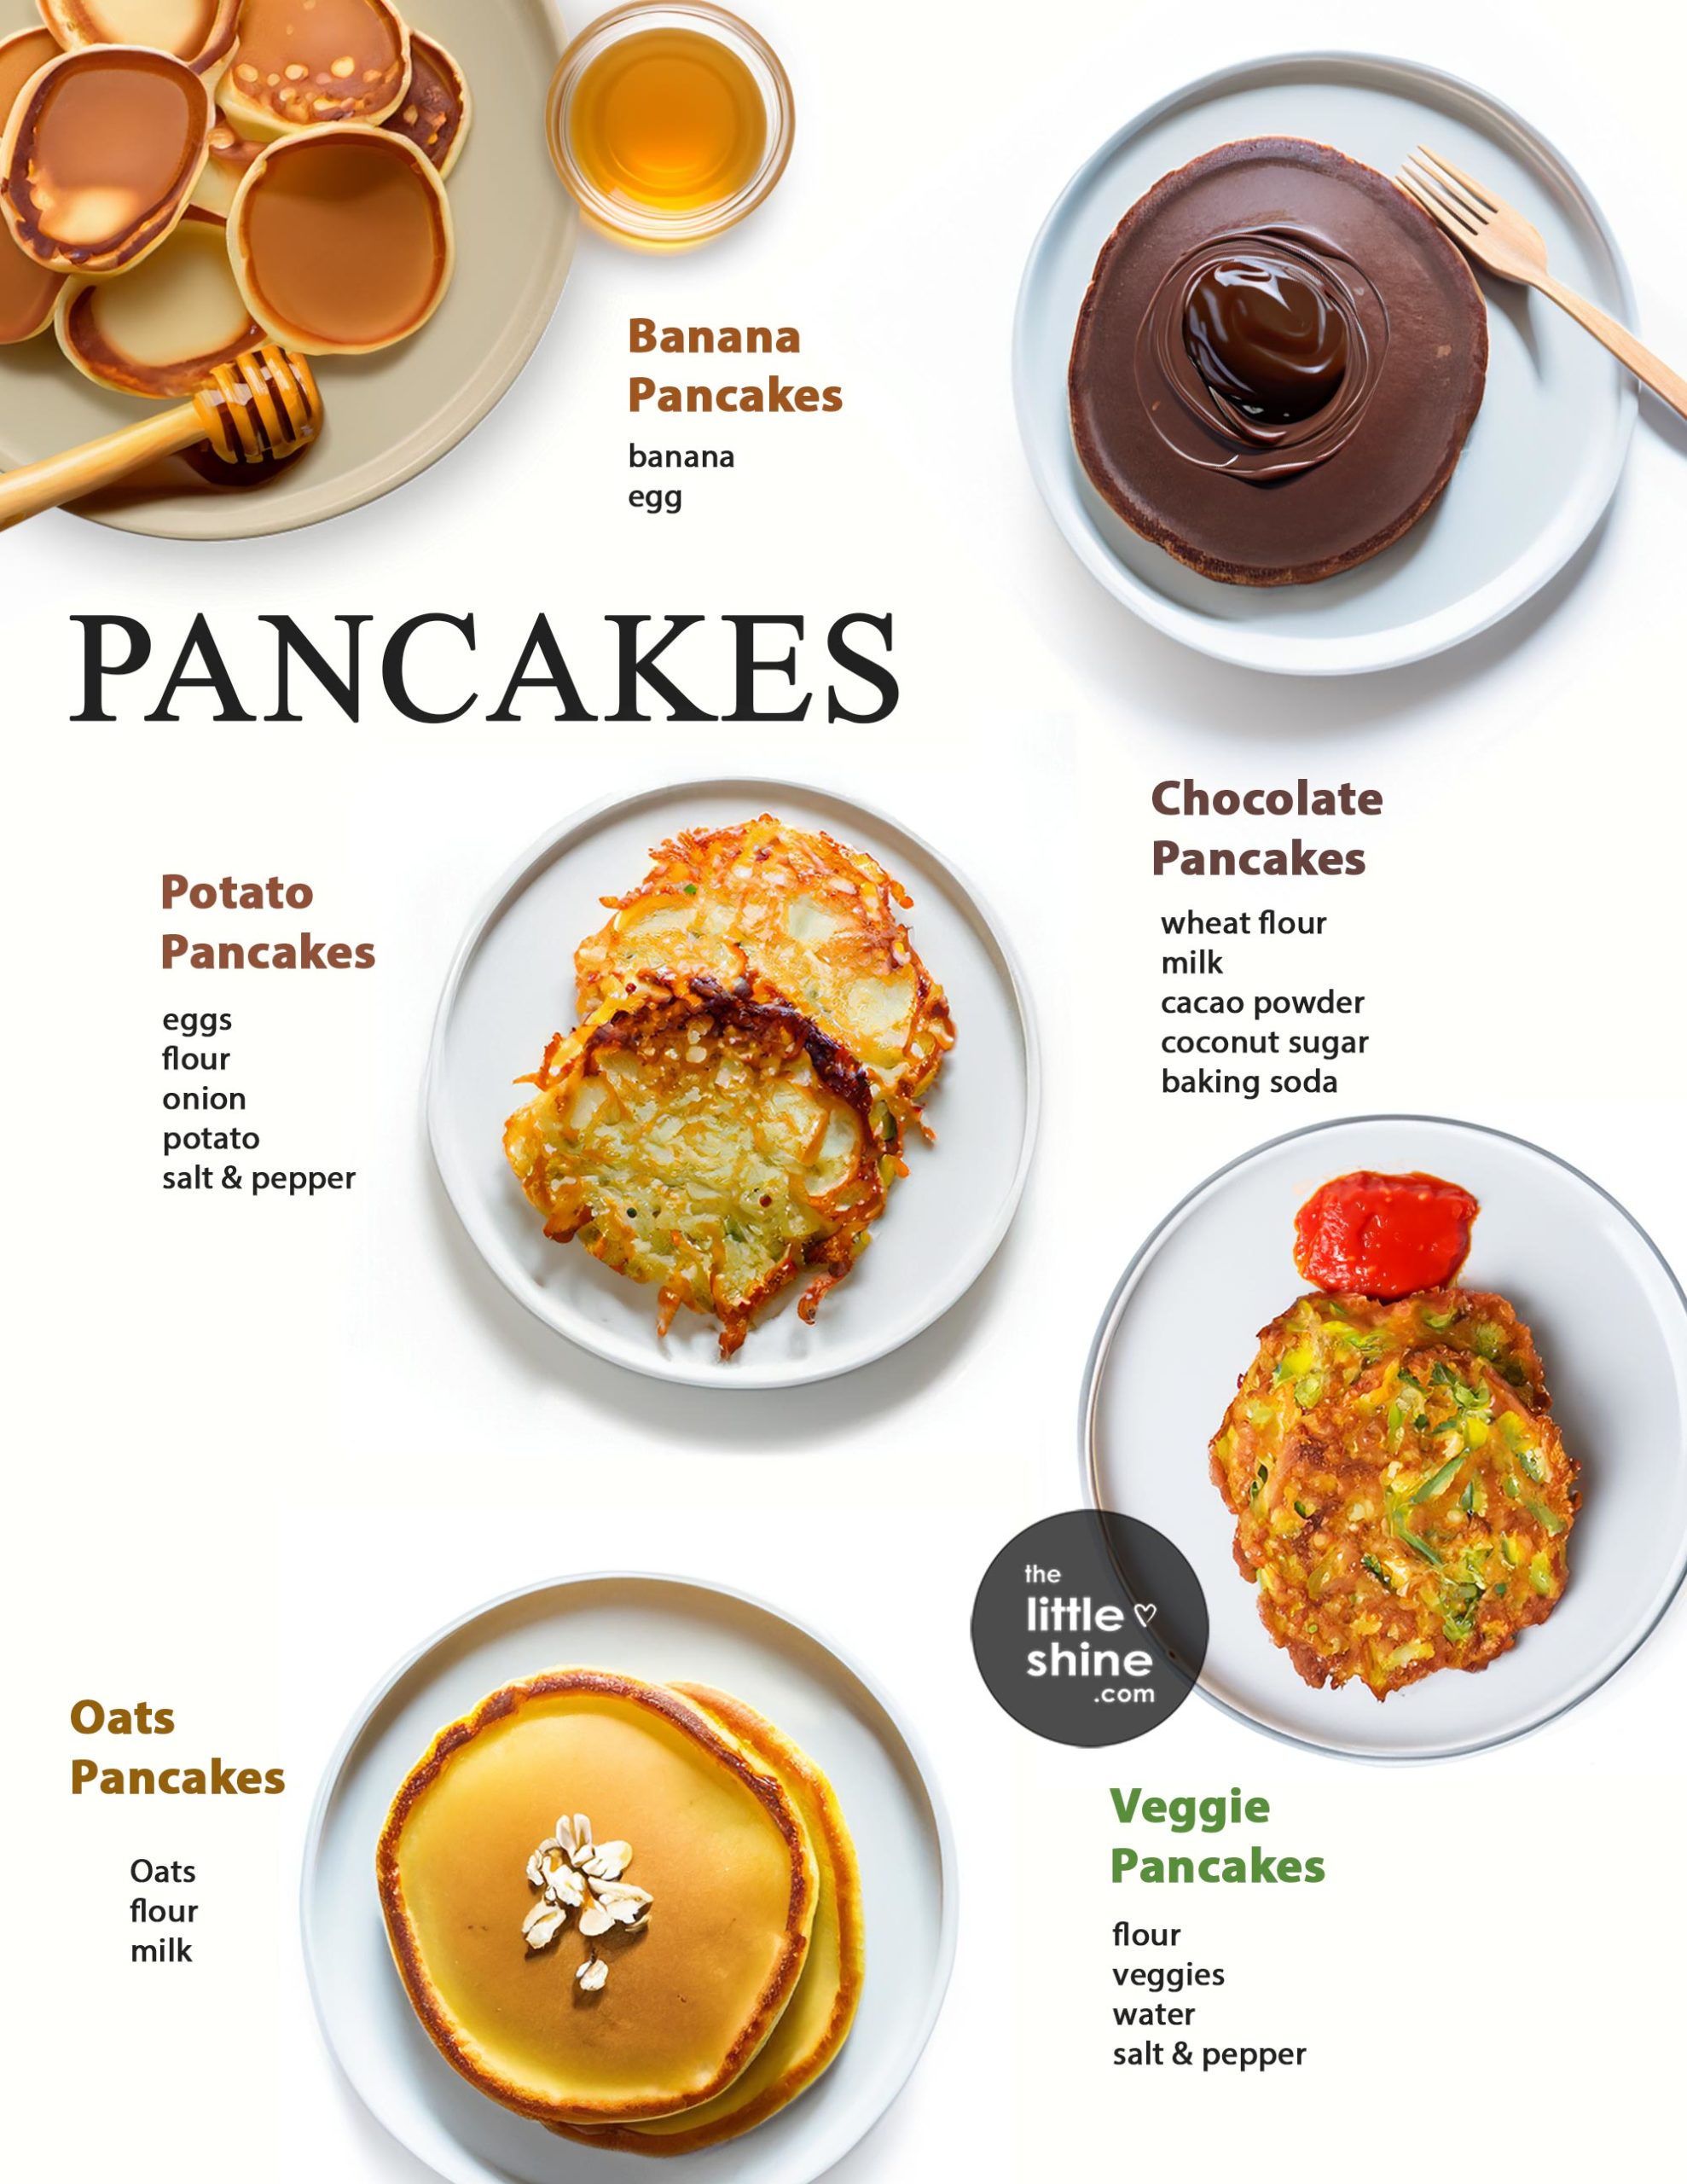 PART 1 - Healthy Breakfast - 6 easy-to-make healthy and delicious PANCAKE RECIPES